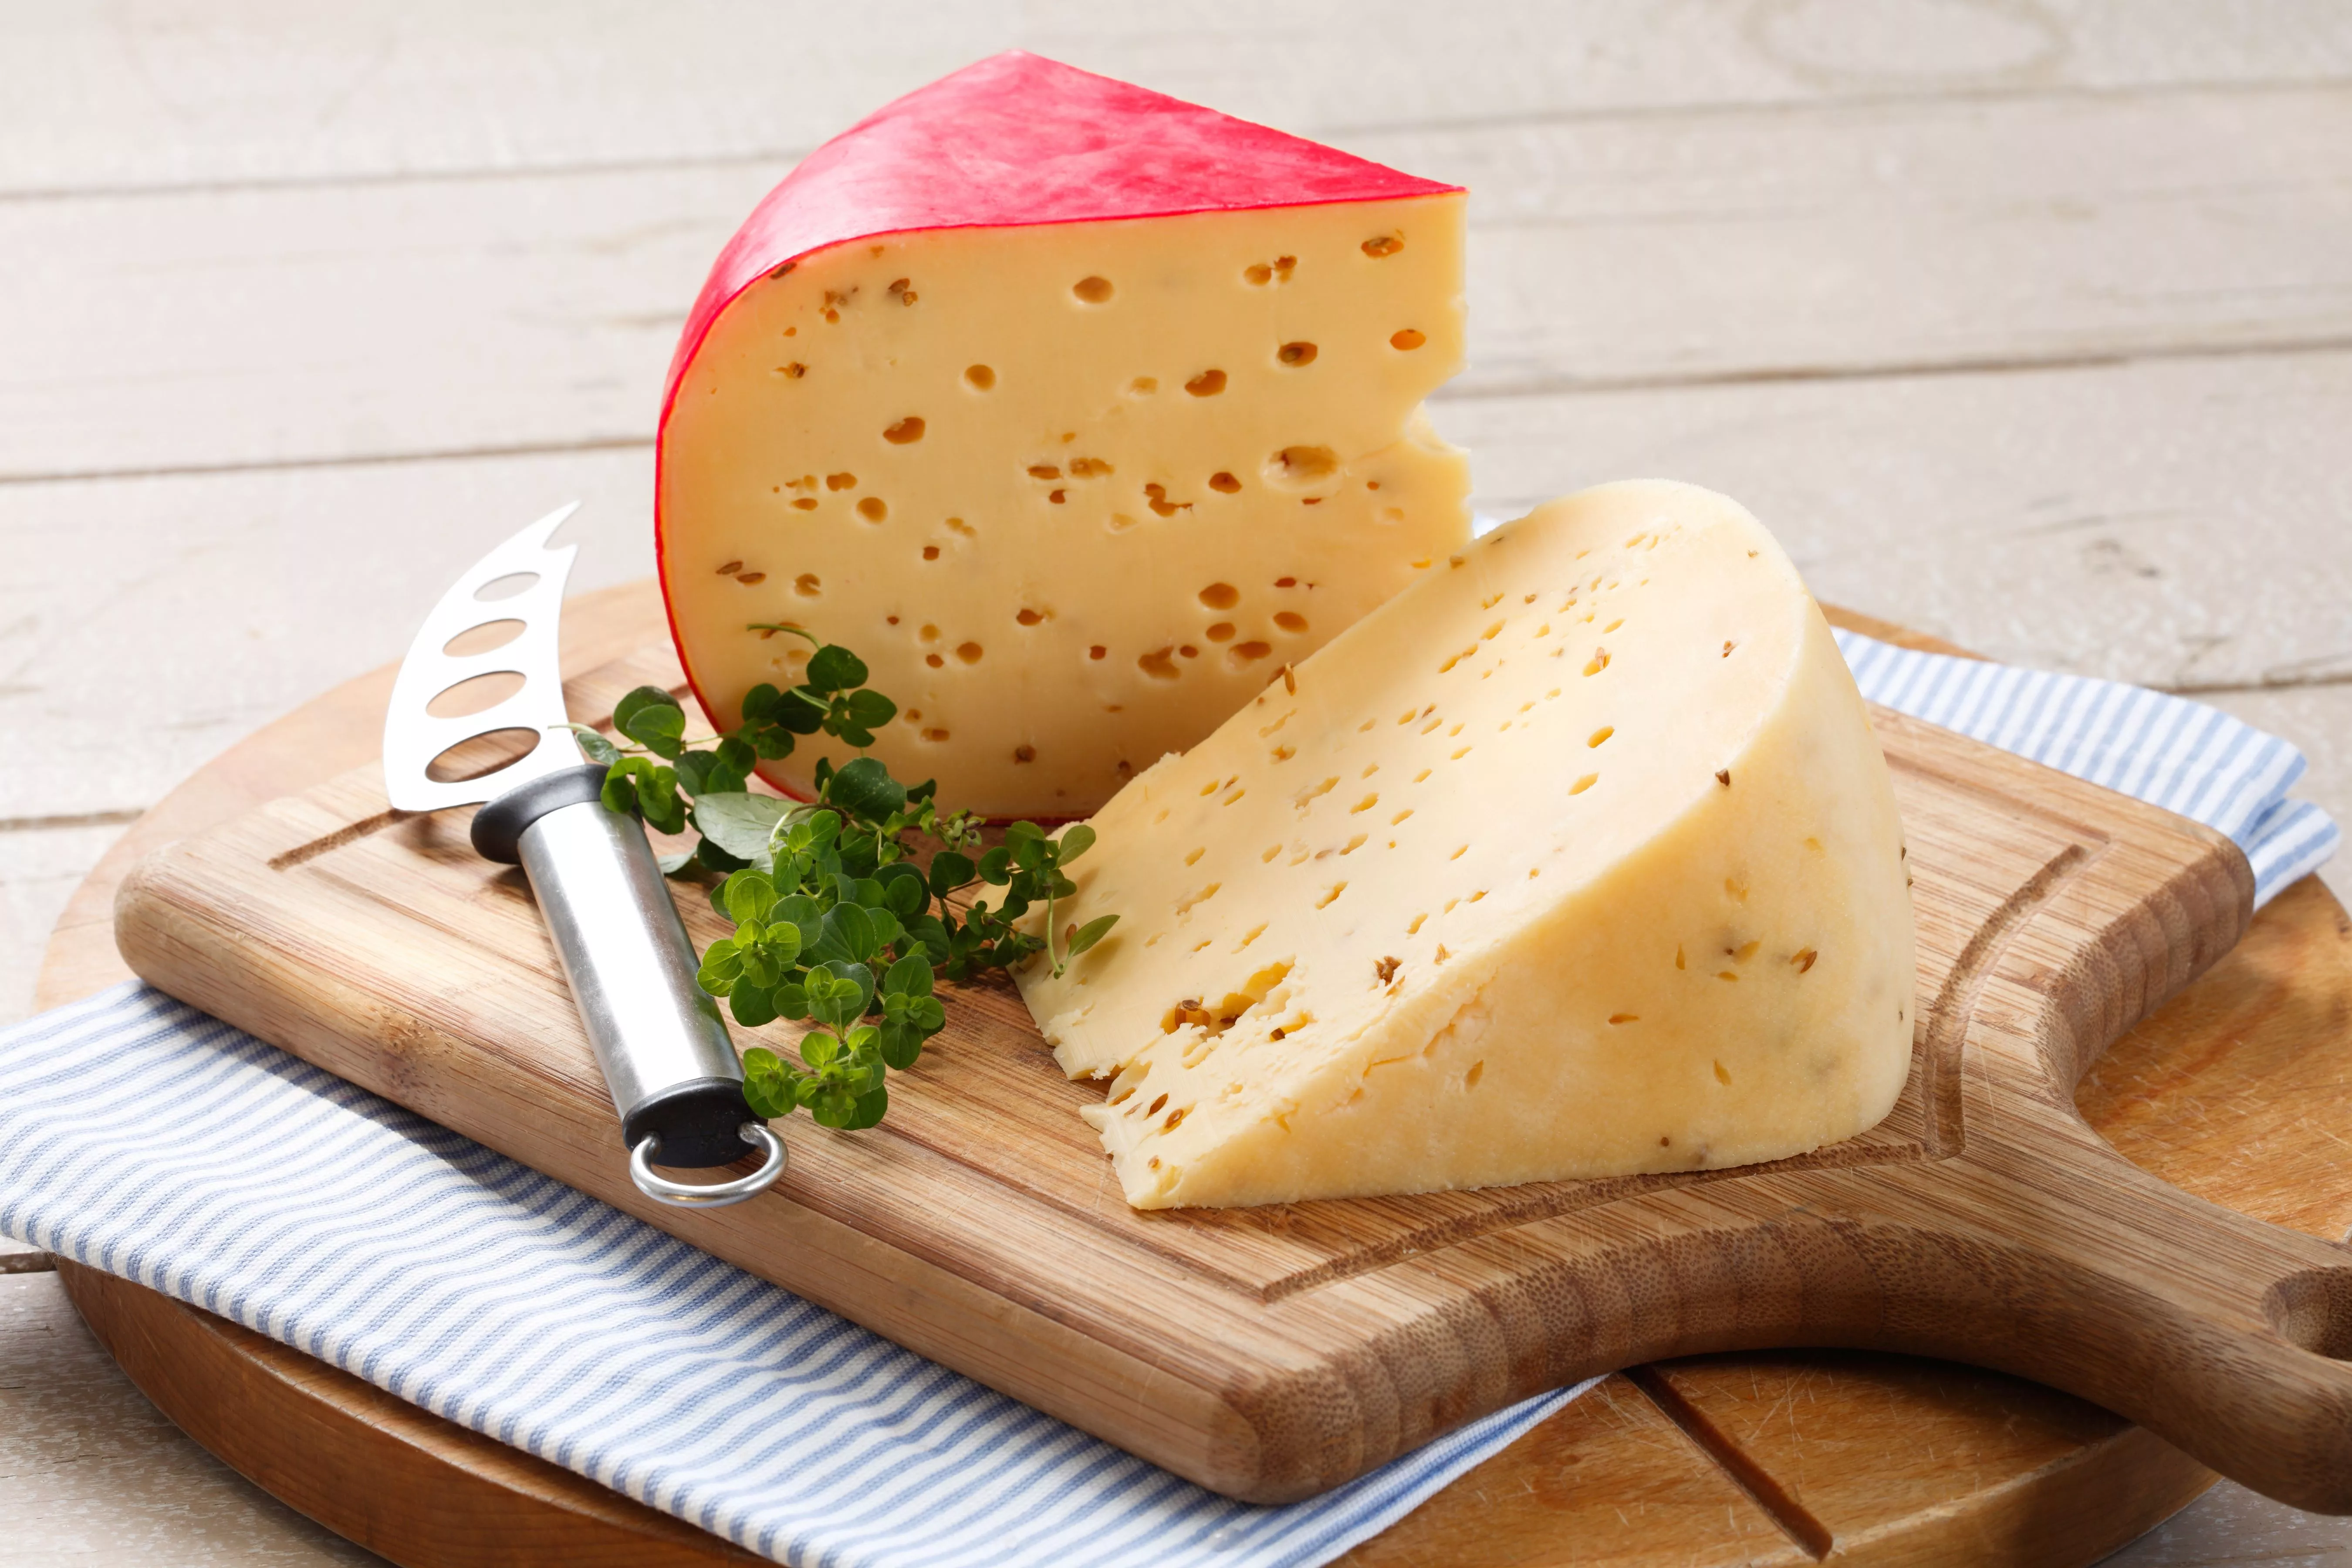 Agrona in Poland, Europe | Cheesemakers - Rated 0.9